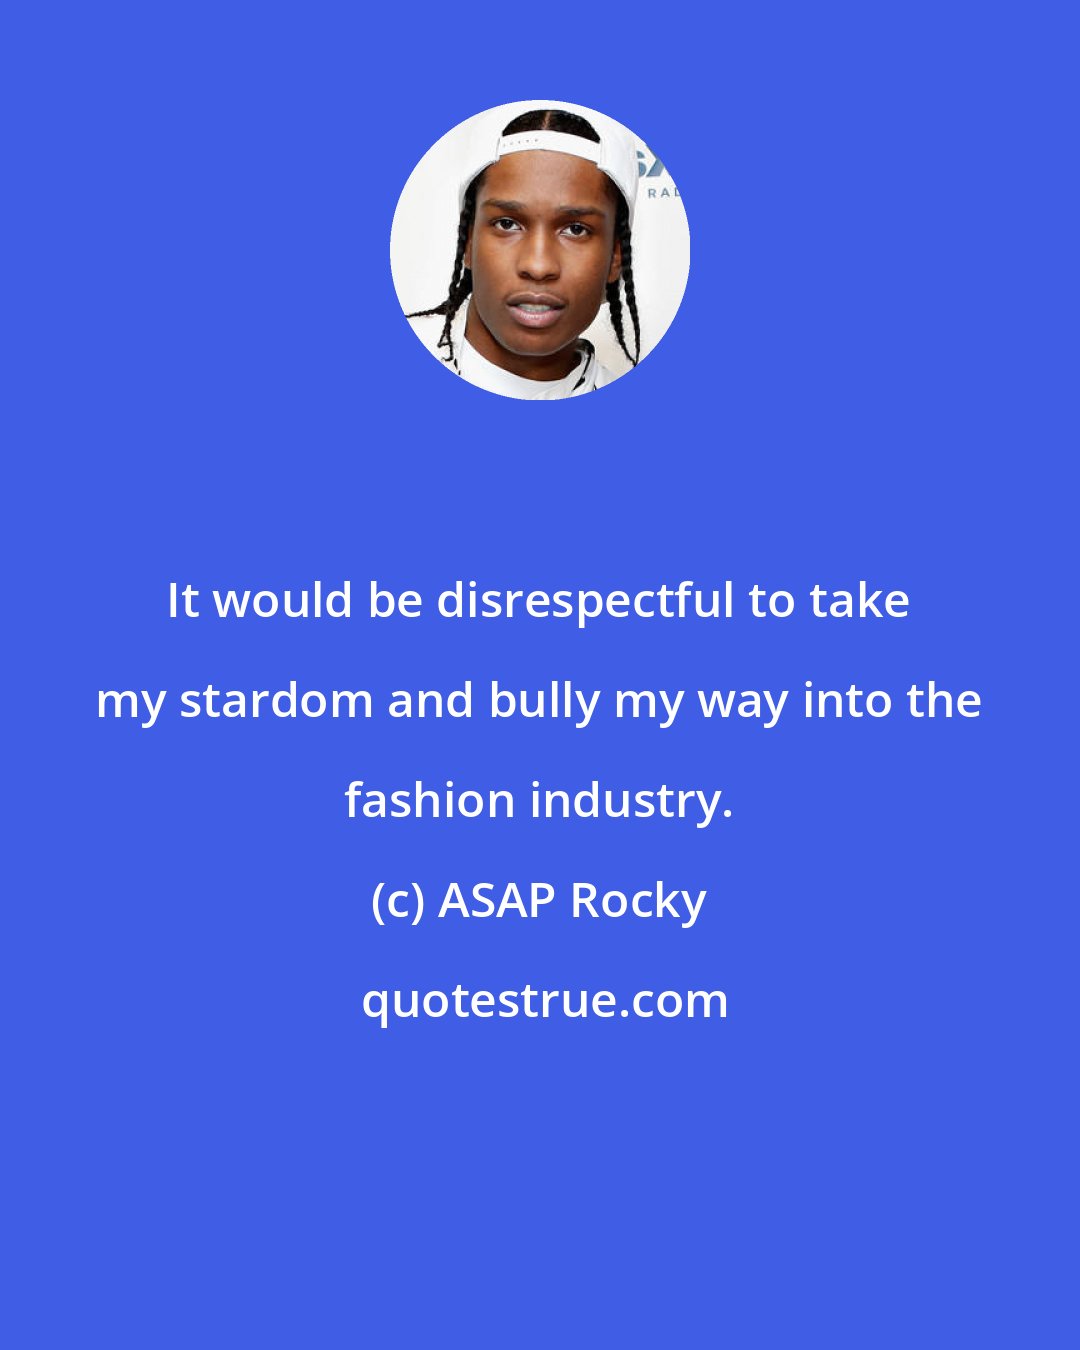 ASAP Rocky: It would be disrespectful to take my stardom and bully my way into the fashion industry.